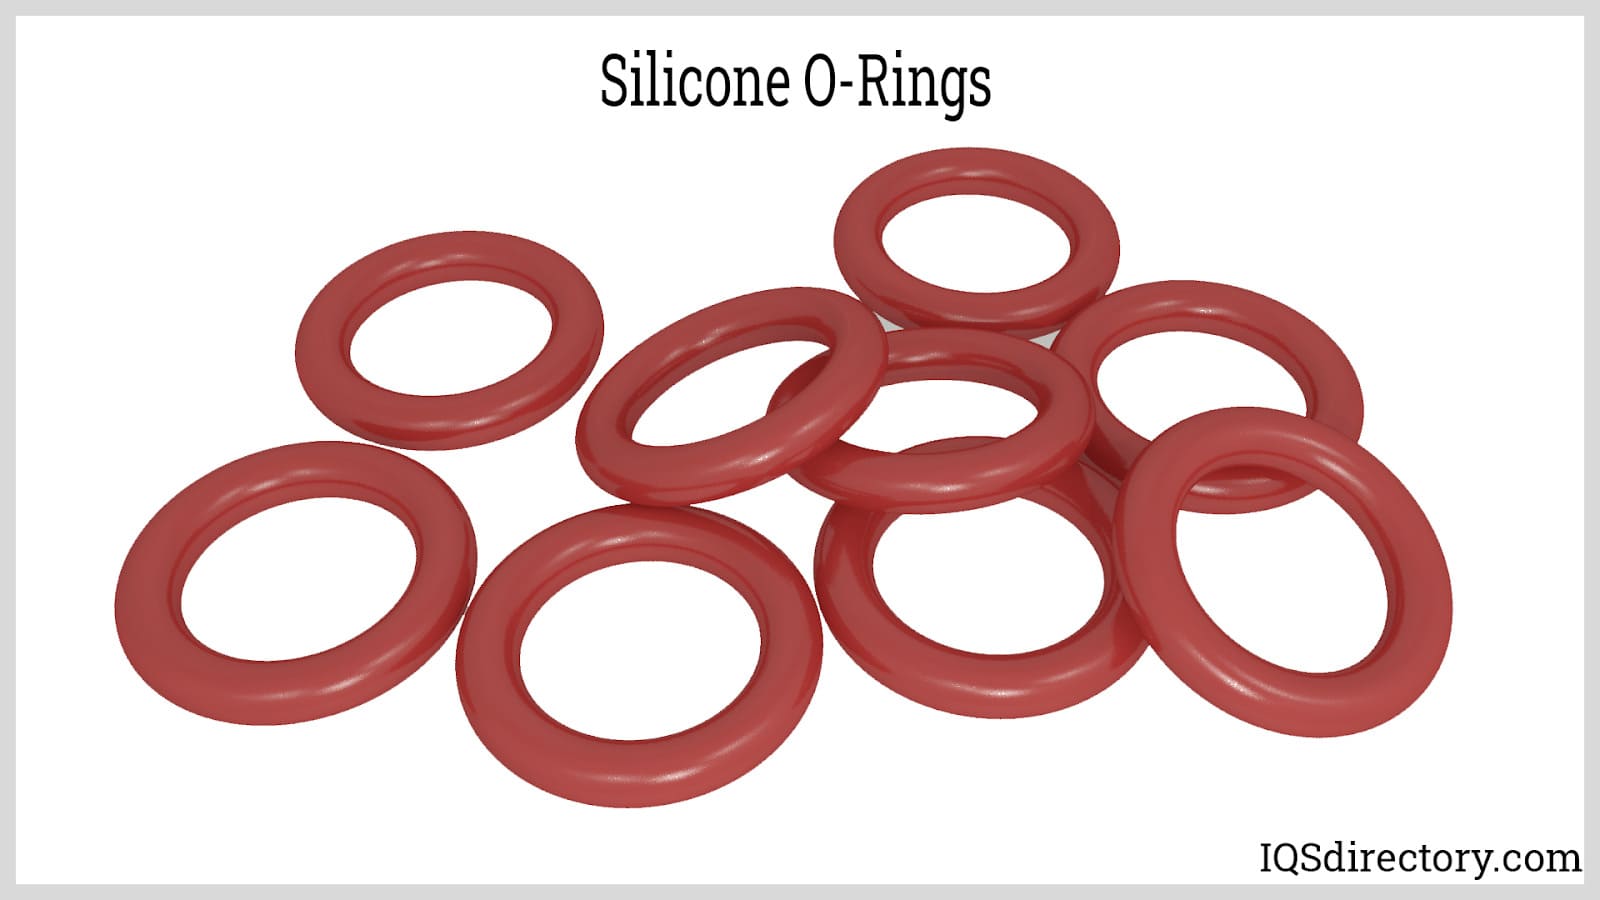 https://www.iqsdirectory.com/articles/o-ring/silicone-o-rings.jpg